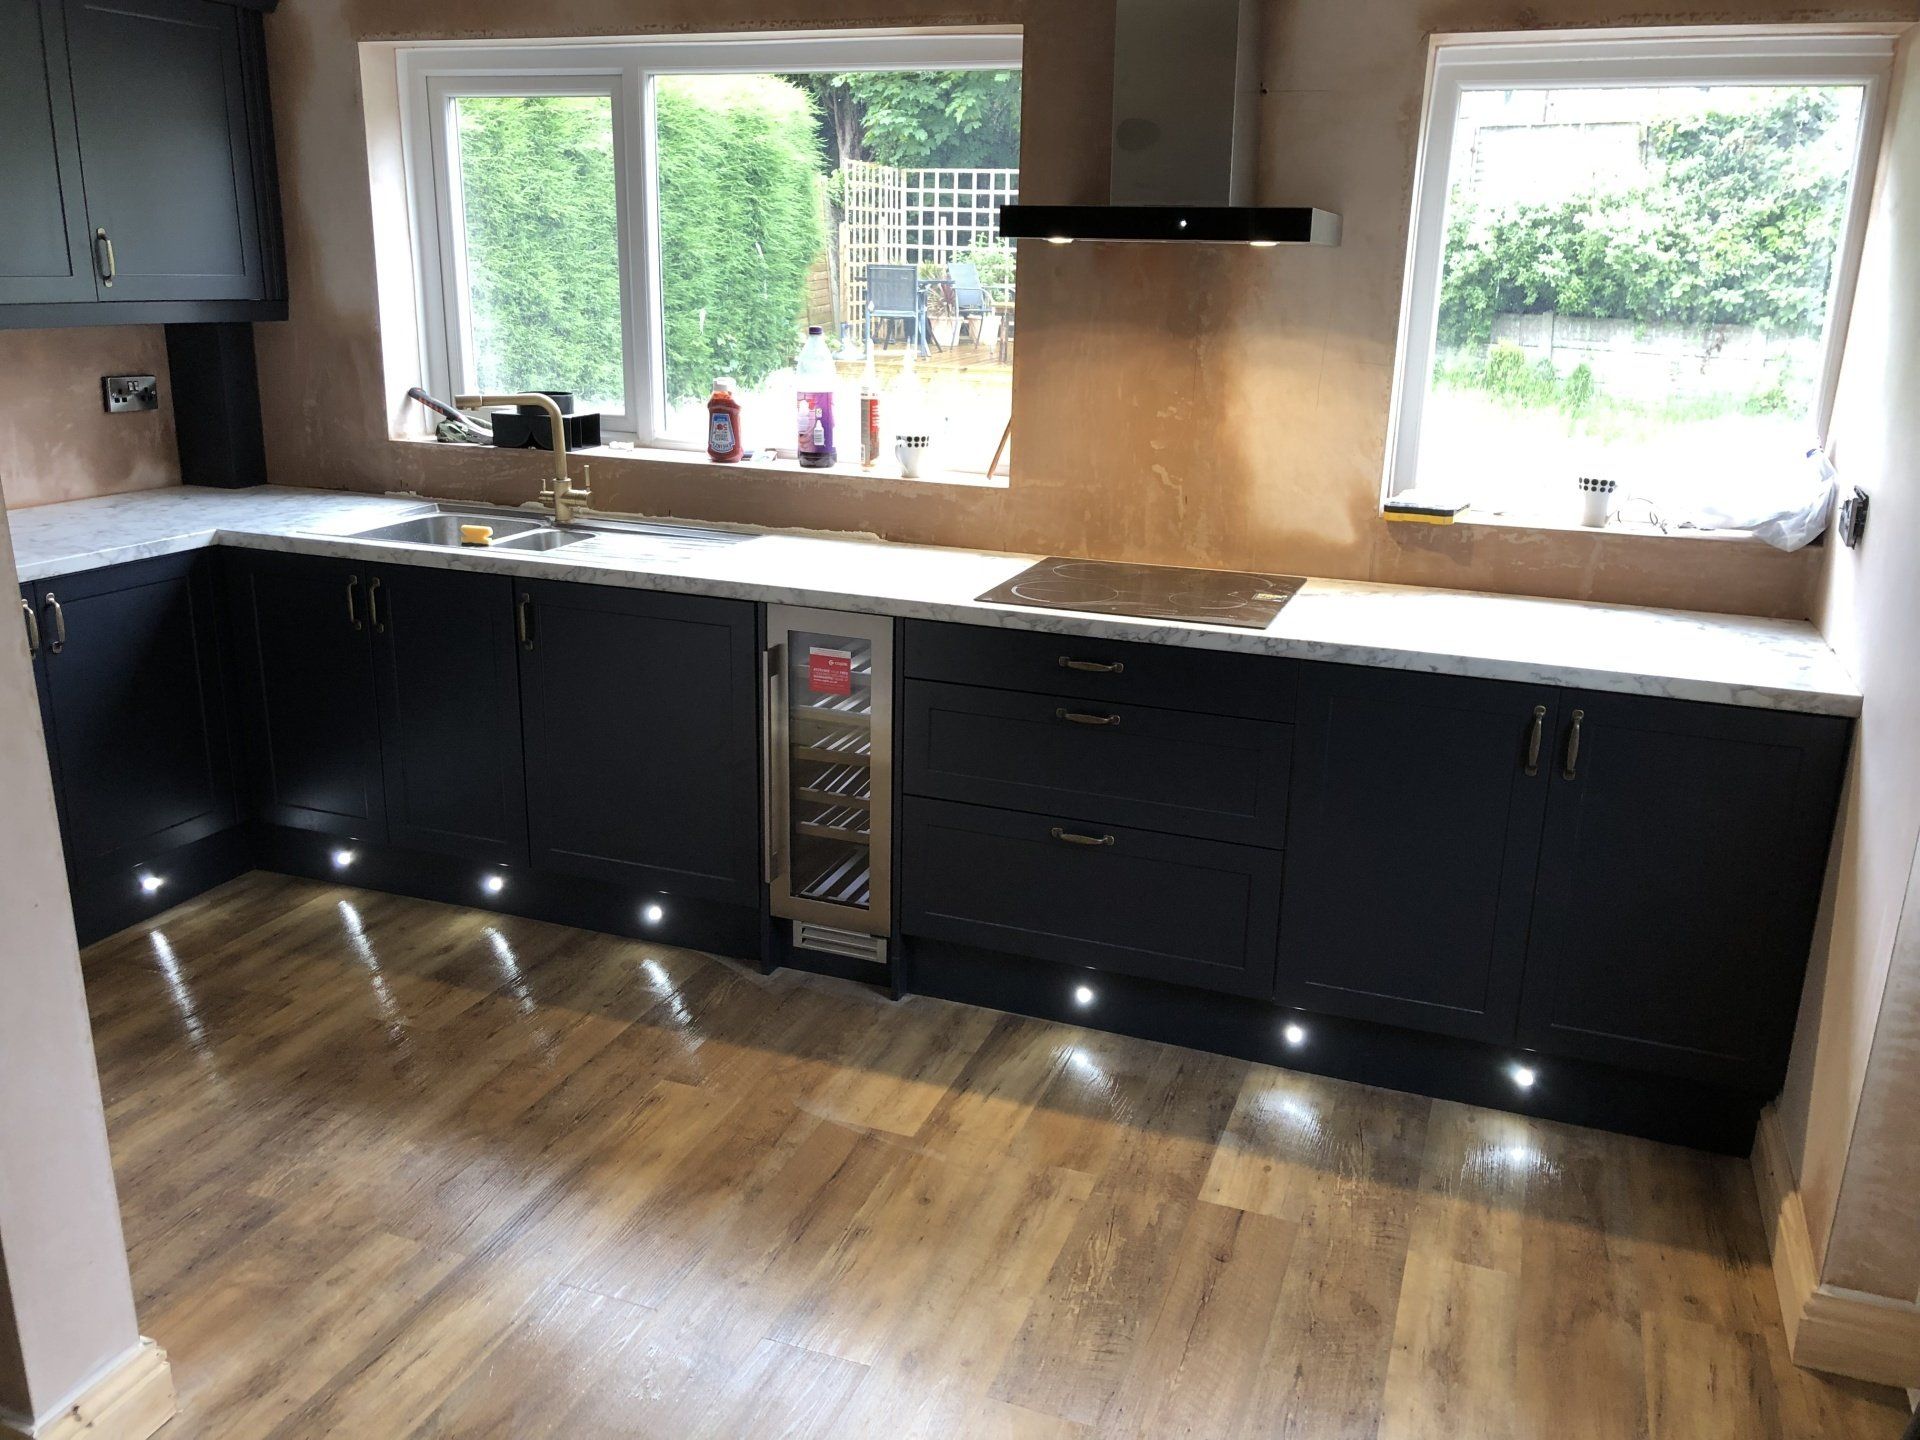 Kitchen plinth lights by Electrician4you in newton le willows